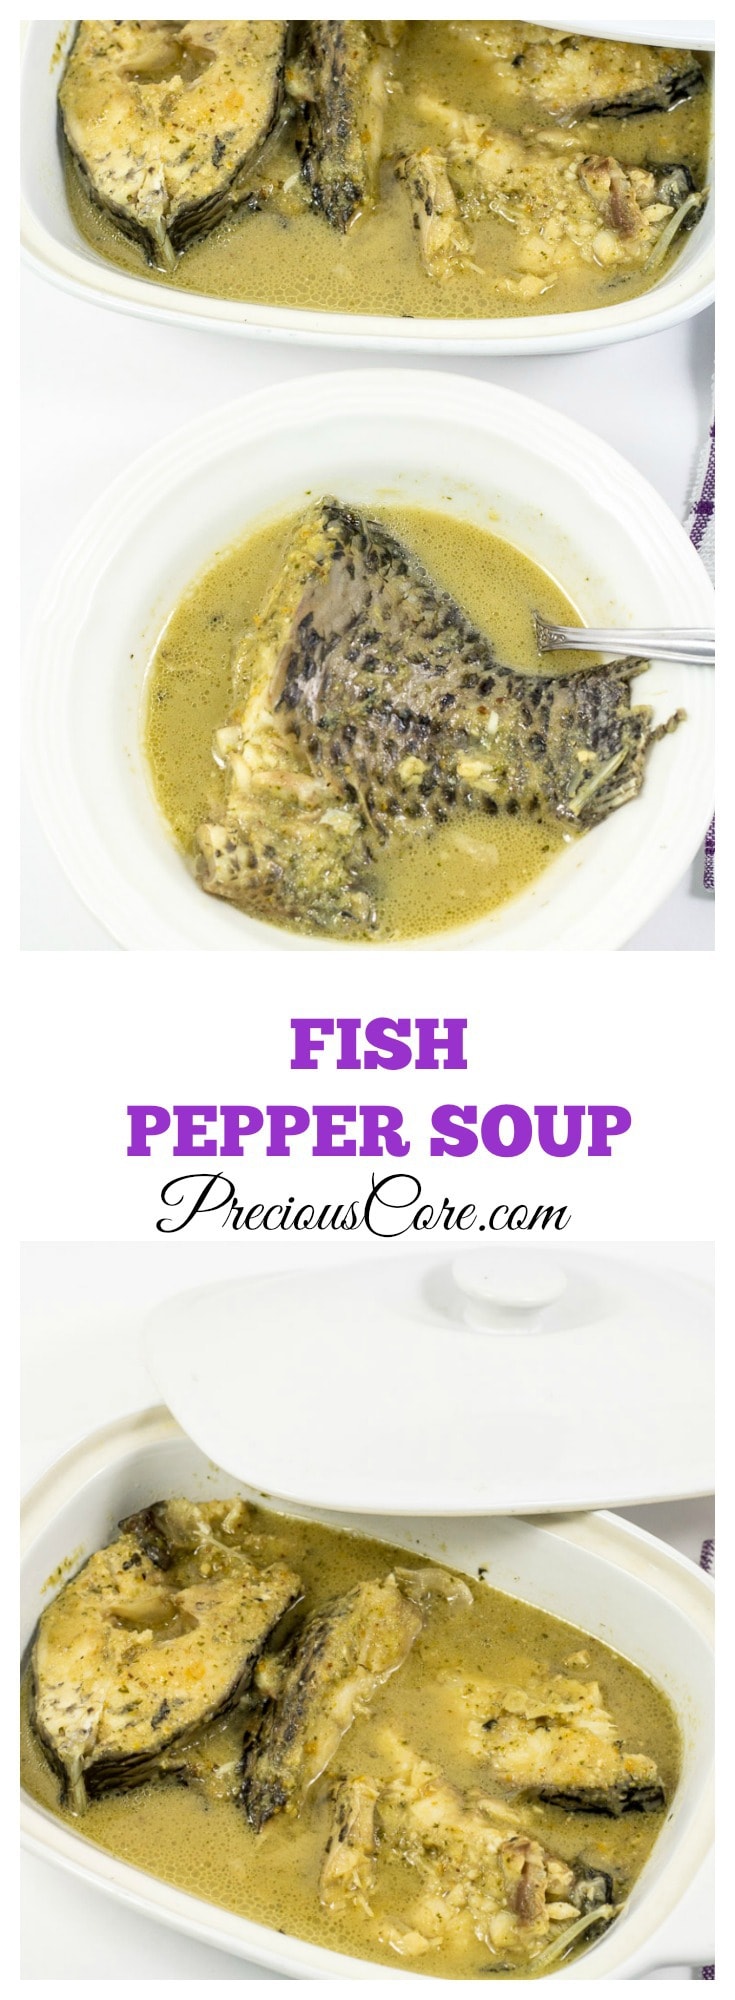 Fish Pepper Soup - Fish cooked with spices - so tasty and delicious! Recipe from PreciousCore.com